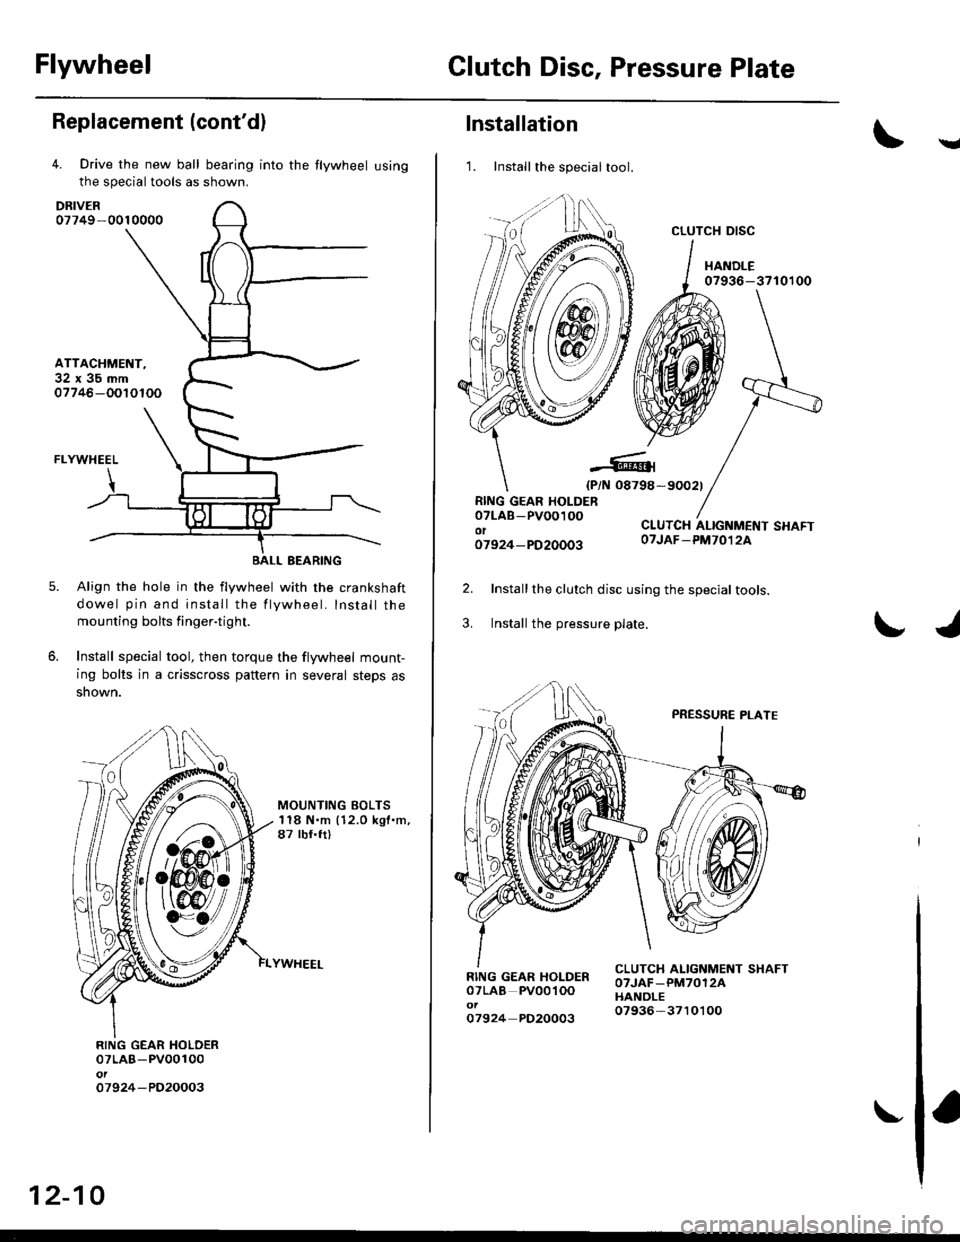 HONDA CIVIC 1997 6.G Workshop Manual FlywheelClutch Disc, Pressure Plate
Replacement (contdl
4. Drive the new ball bearing into the flywheel using
the special tools as shown.
DRIVER07749-0010000
ATTACHMENT,32x35mm07746-OOIOTOO
FLYWHEEL
